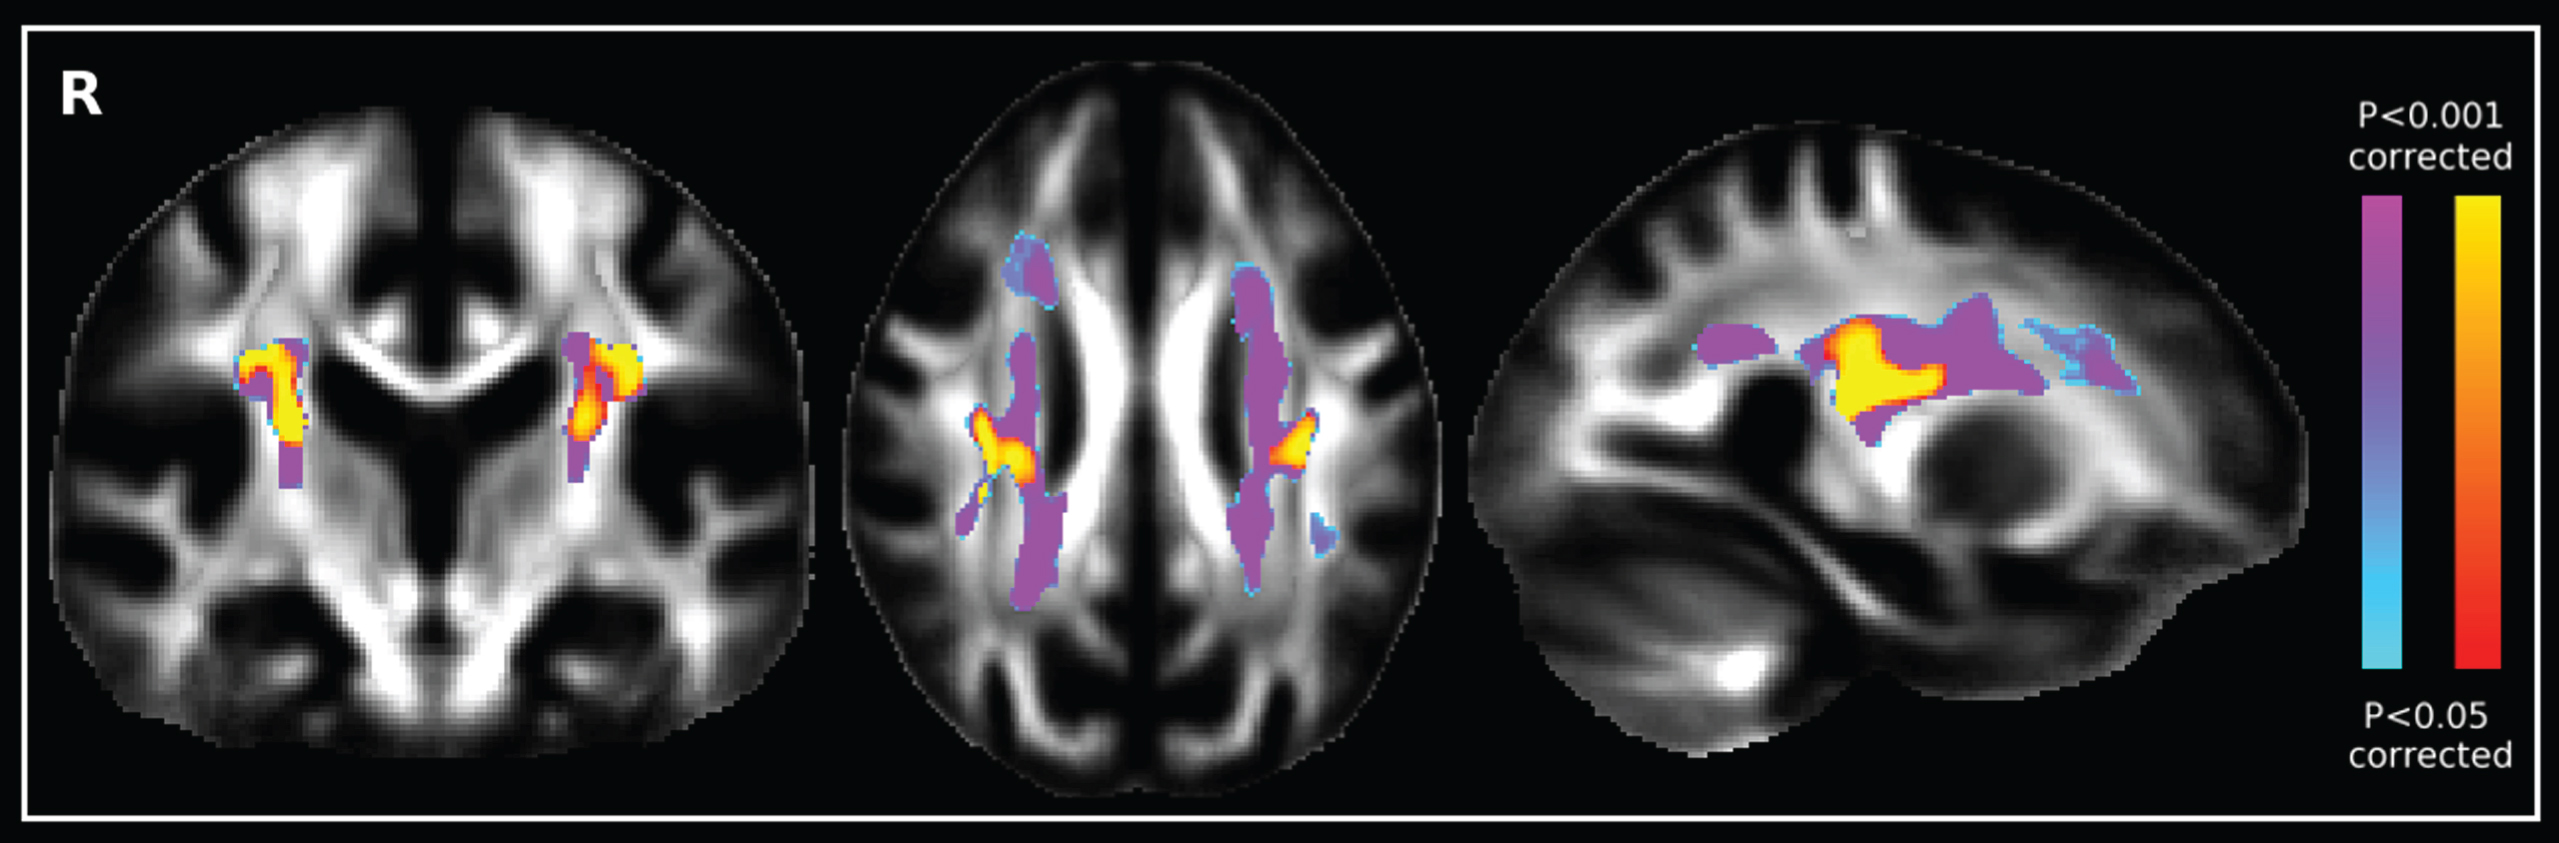 Diffusion tensor image comparing the increase of fractional anisotropy of AD patients (blue-purple scale) with healthy controls (red-yellow scale). Image reprinted with permission from [5].